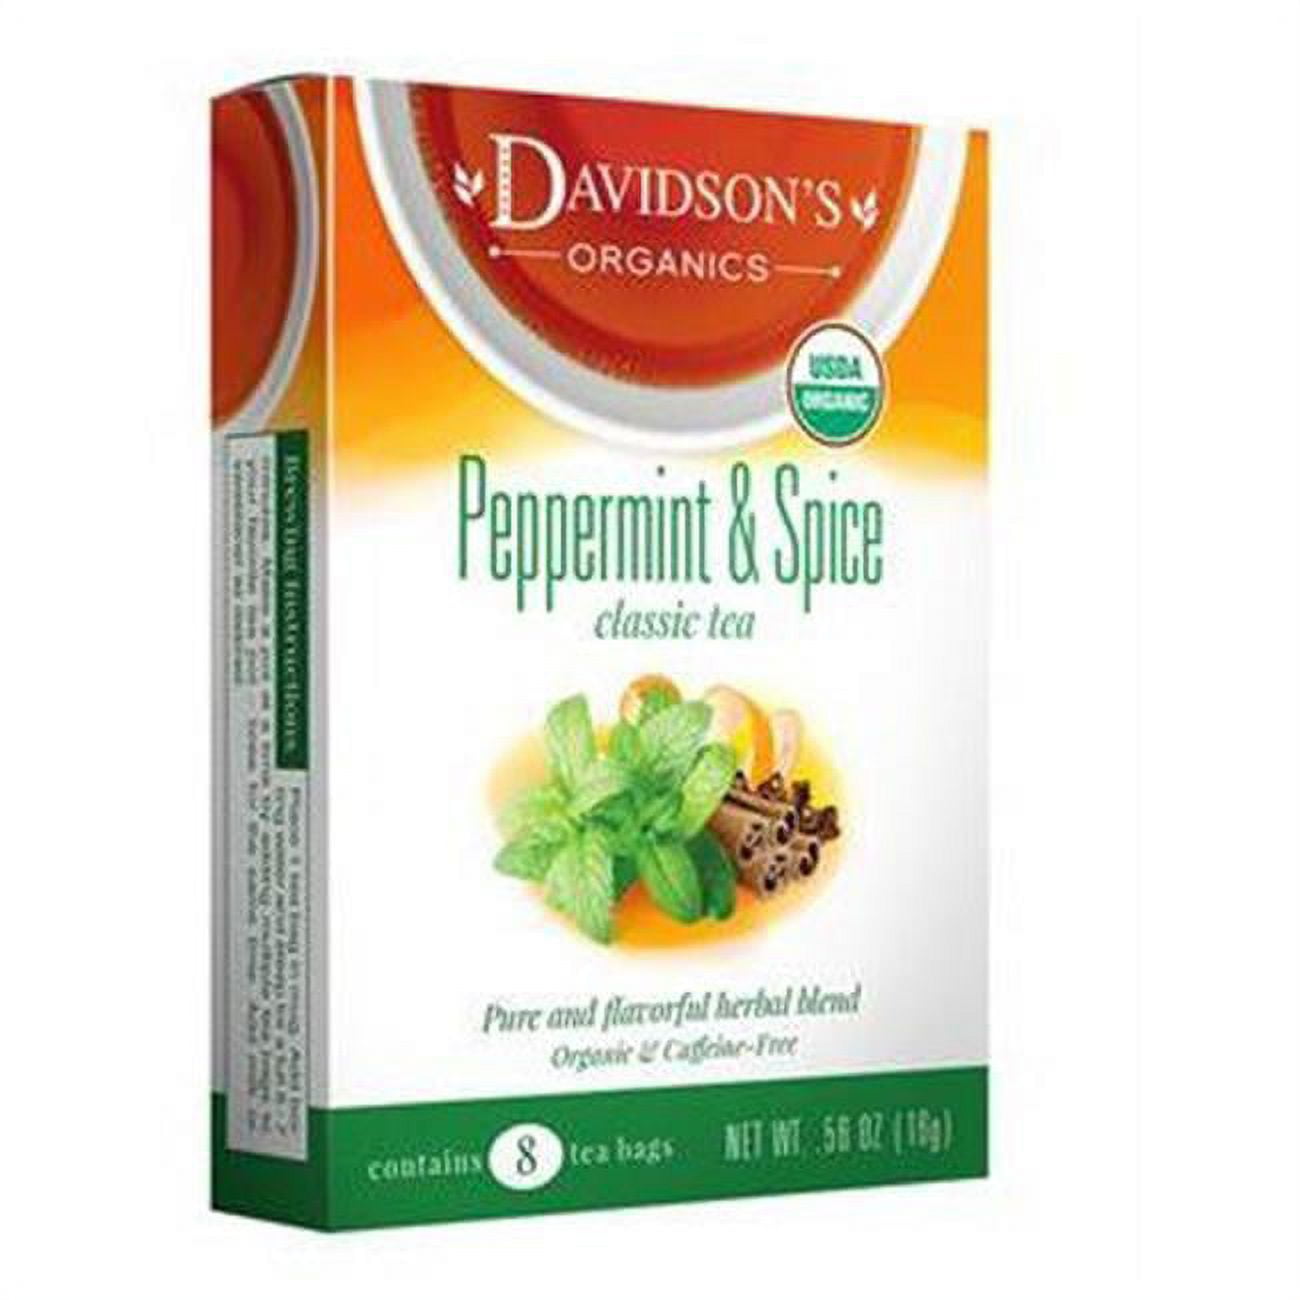 Picture of Davidsons Organics 2565 Peppermint & Spice Tea - Pack of 6 & Box of 25